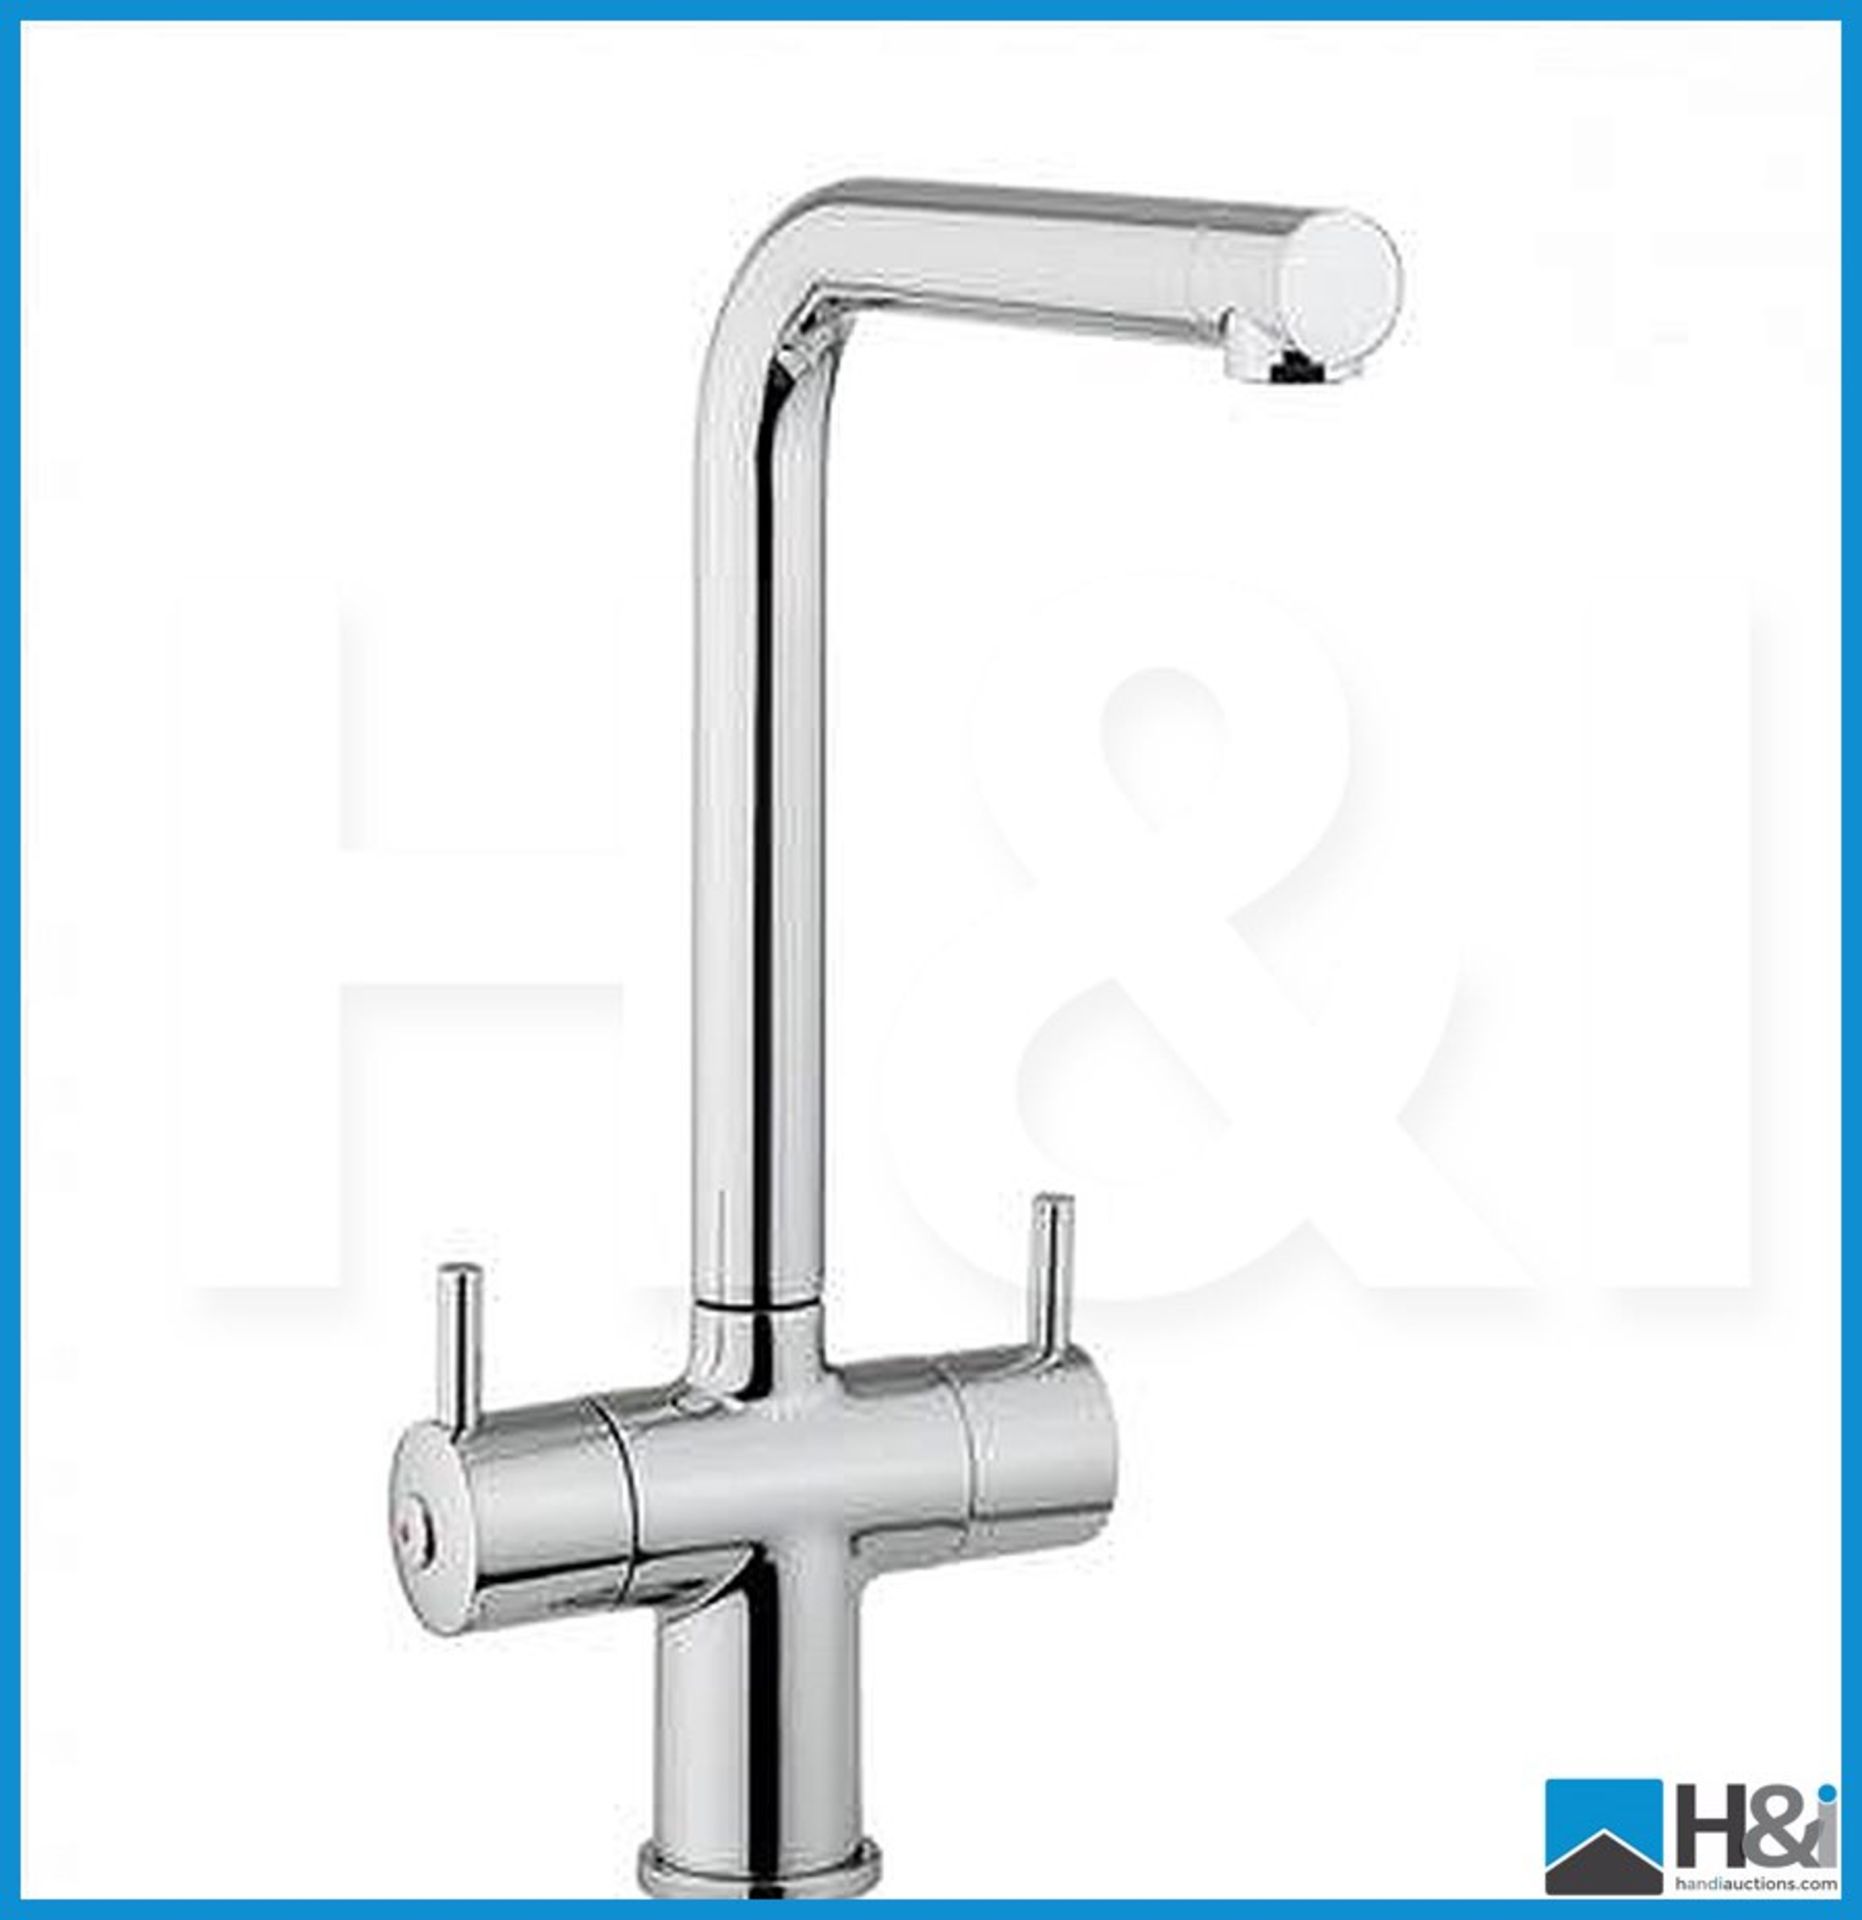 Designer Crosswater NT712DC Ninety kitchen mixer in polished chrome finish. New and boxed. Suggested